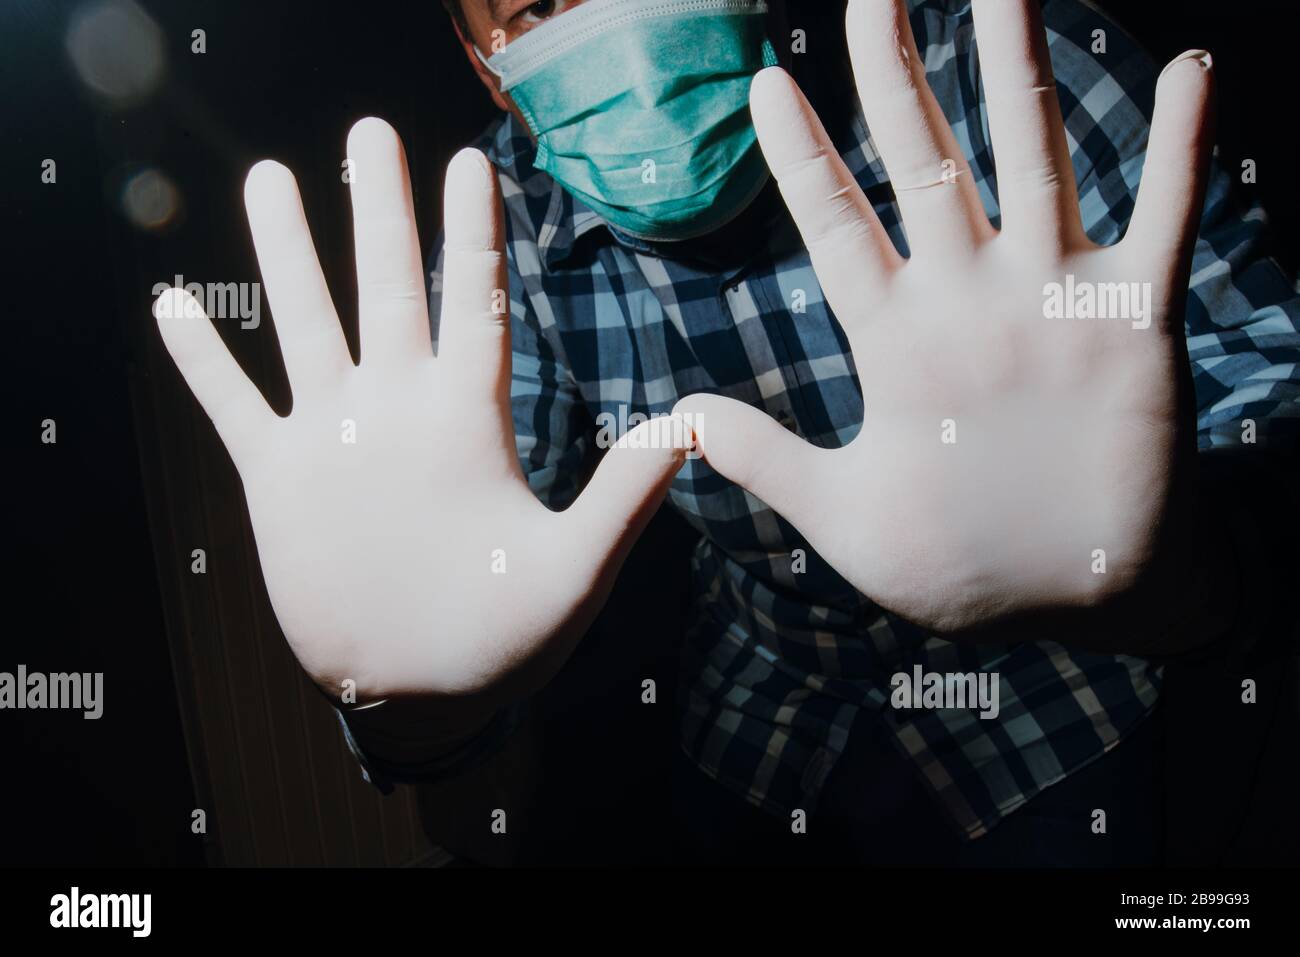 Affraid Man Hands Social Distancing With Medical Gloves And Mask For Protection From Corona Virus Covid 19 Stock Photo Alamy